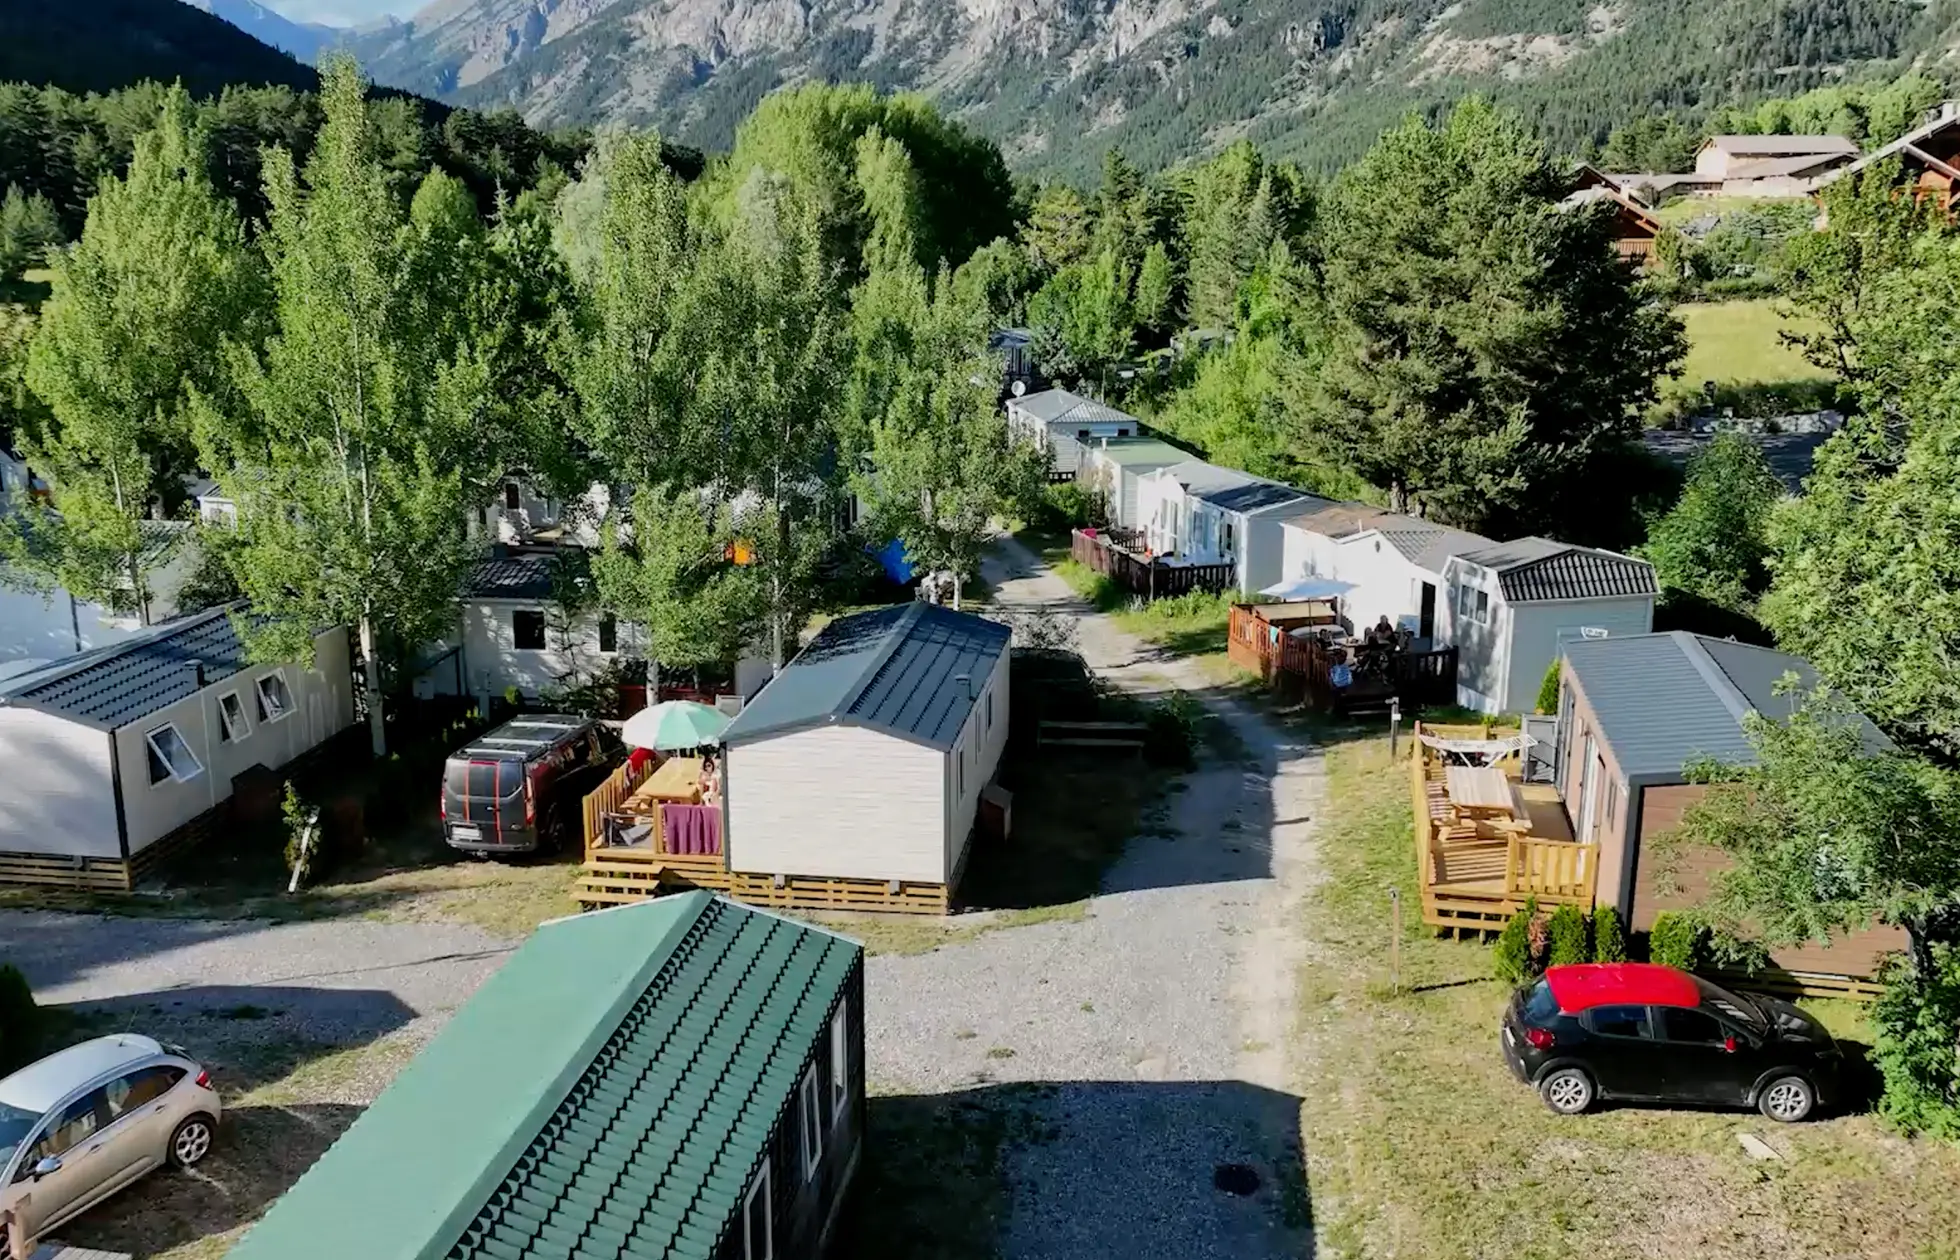 Camping Le Montana - Situation 2